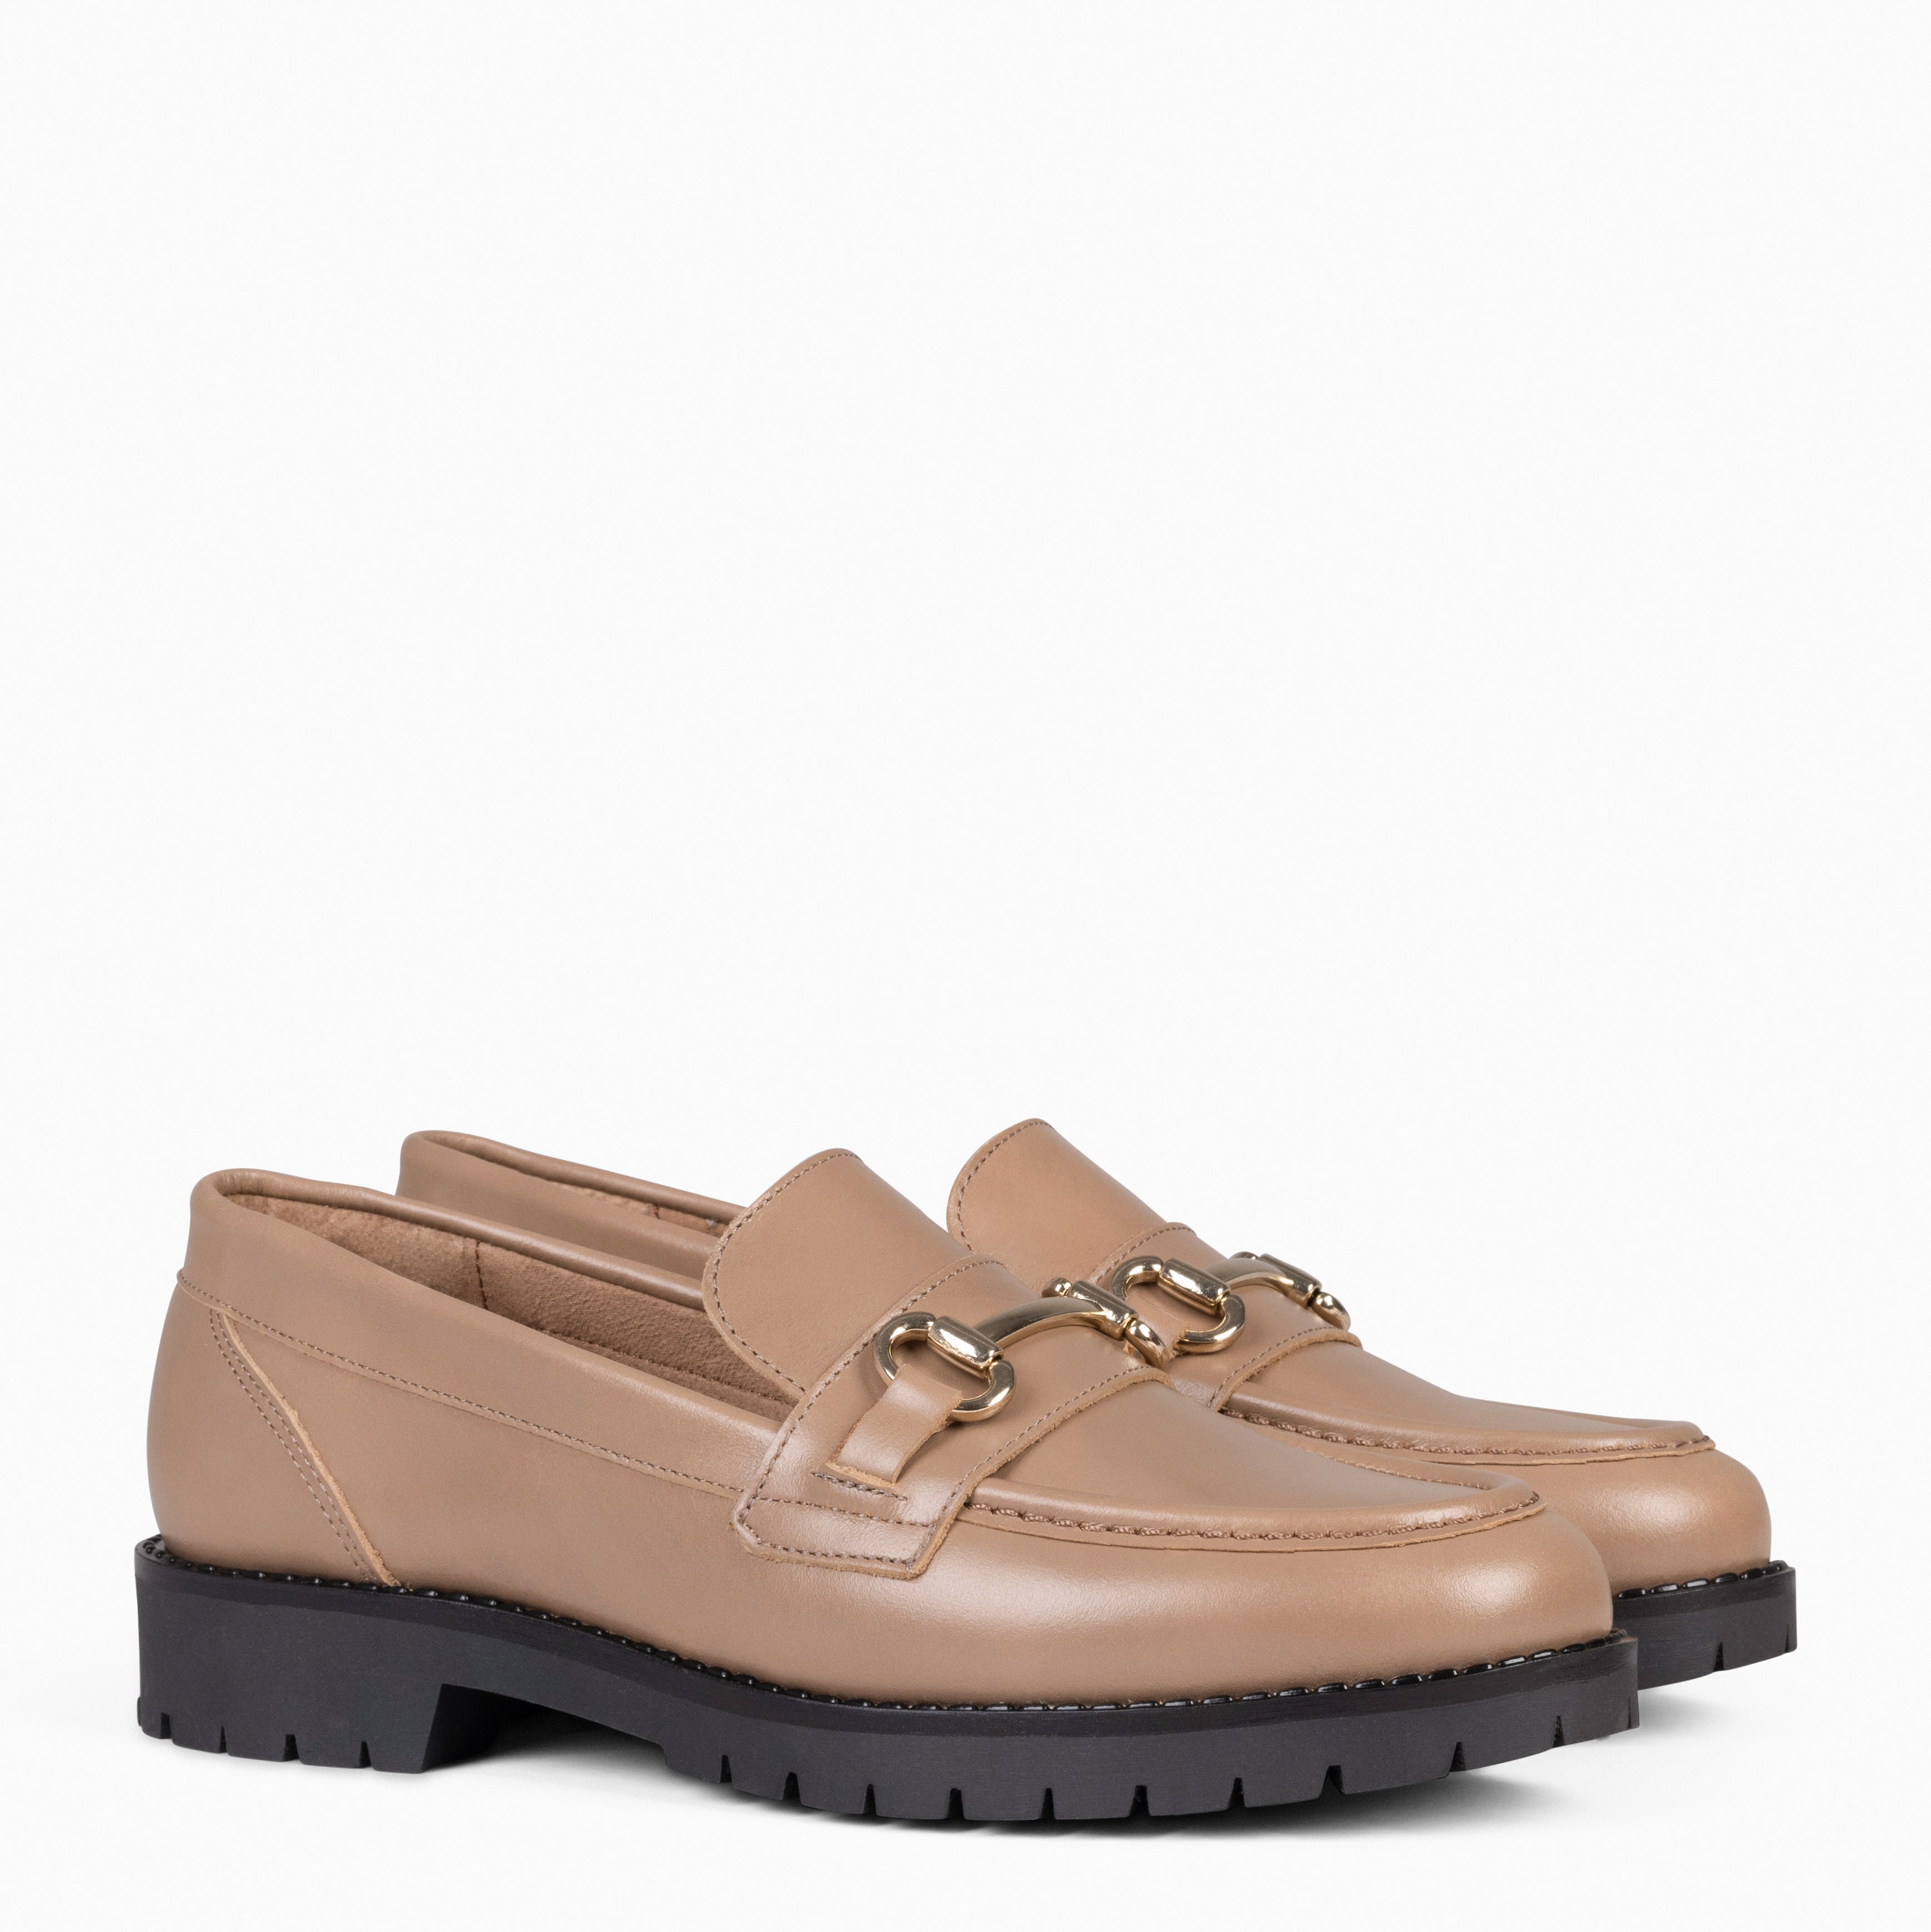 TREVILLA – TAUPE Casual women moccasins 